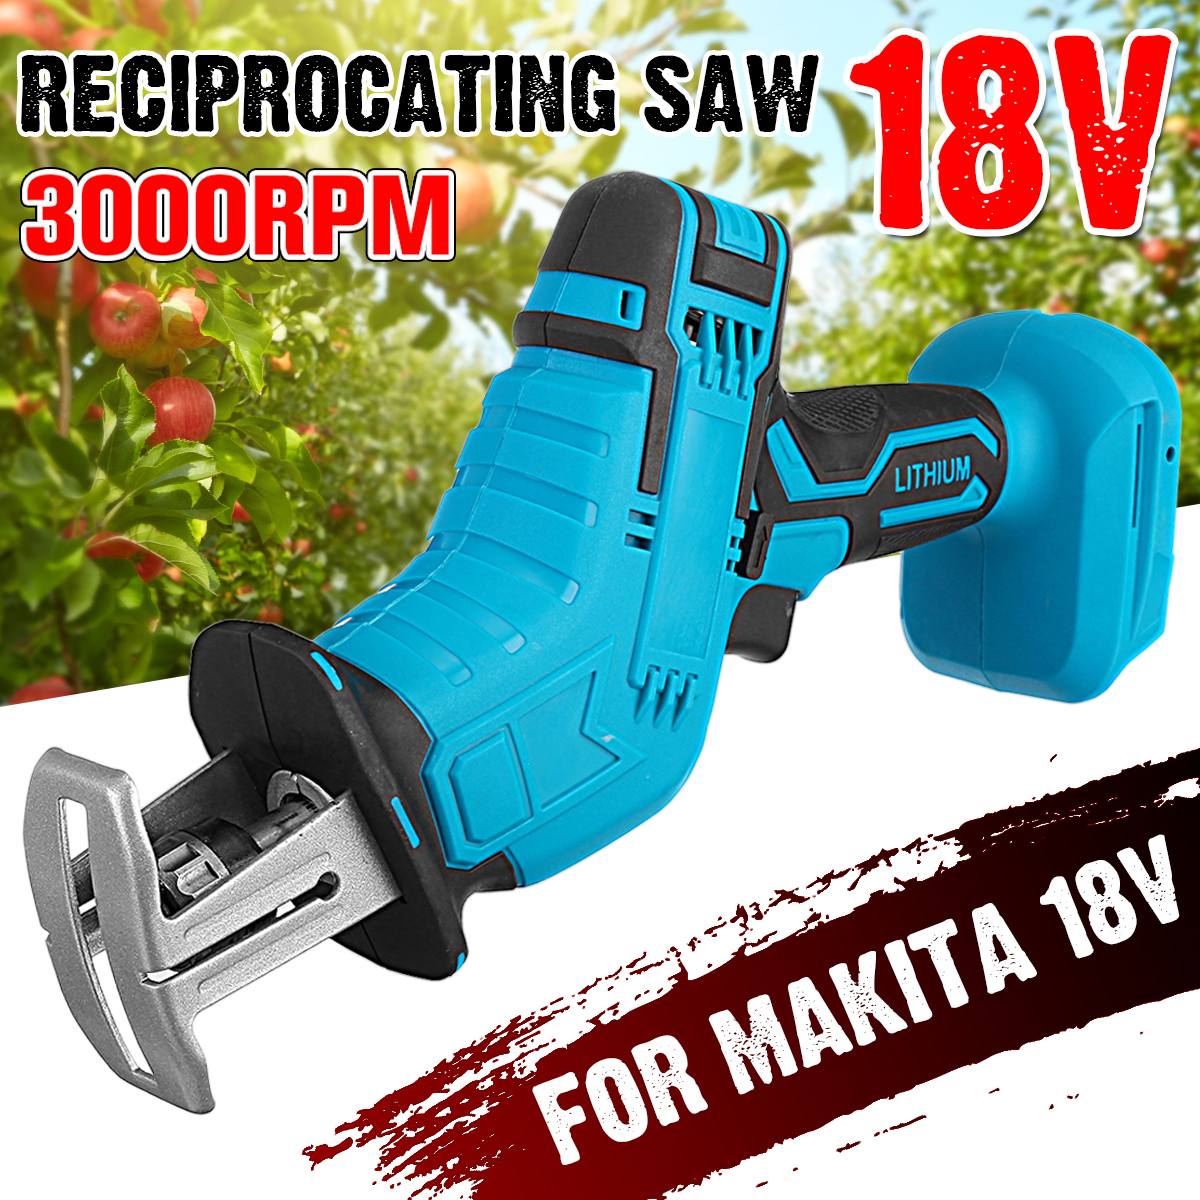 VIOLEWORKS-10mm-Cordless-Reciprocating-Saw-3000rpm-Saw-Replacement-Variable-Speed-For-Makita-18V-Bat-1673434-1